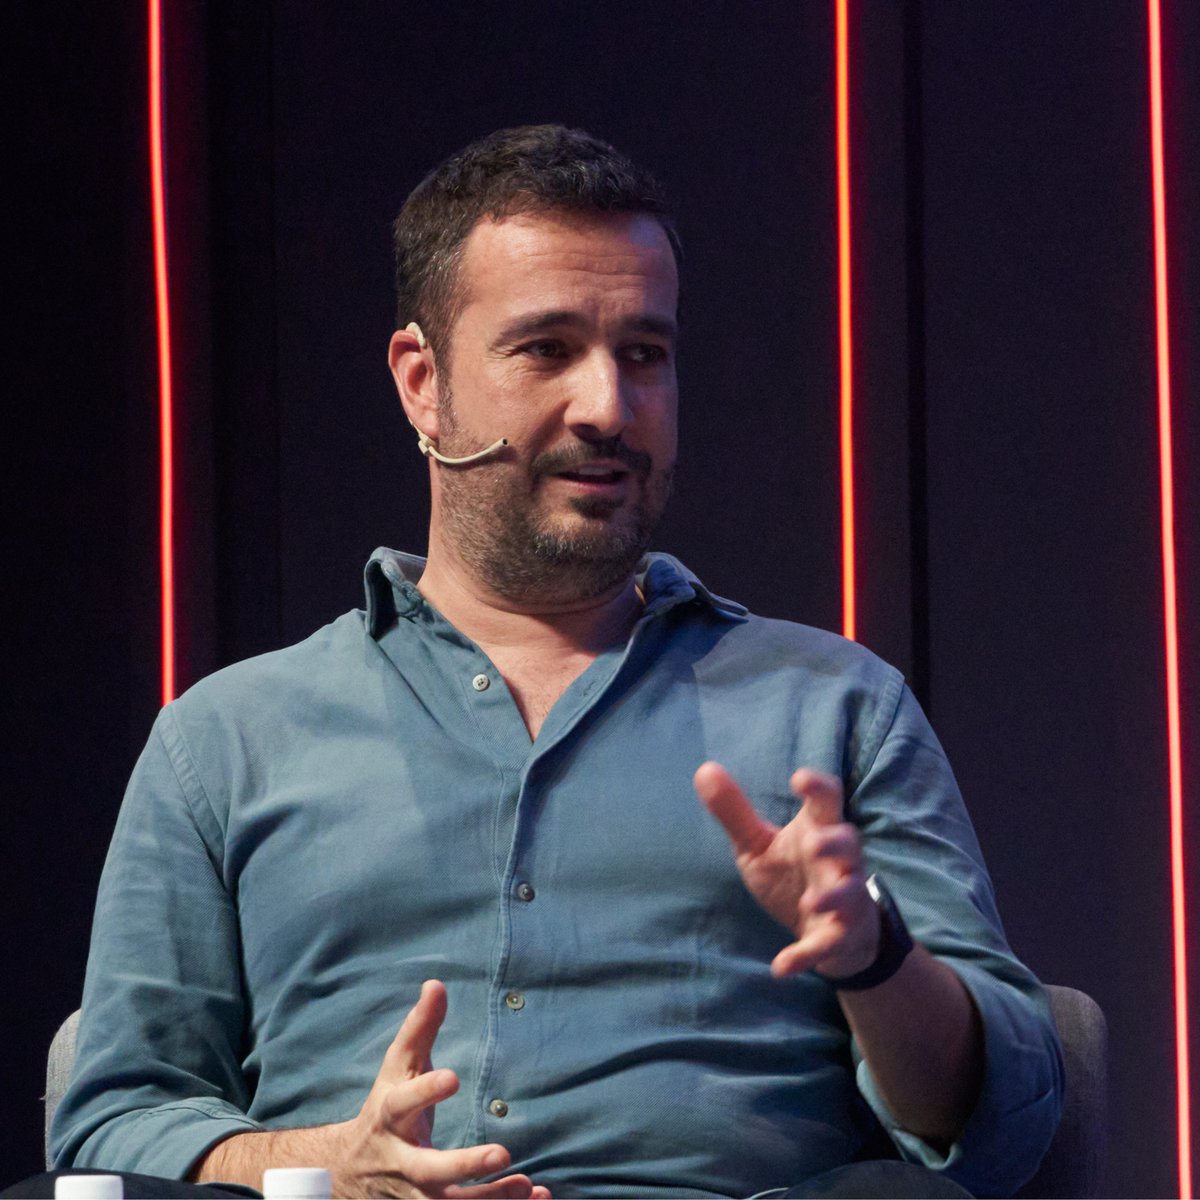 Check out highlights from the IE Television & Film club's recent event with Álvaro Díaz, Director of Non-Fiction Spain, and @OcanaTomas, Manager of Non-Fiction Spain, from @NetflixES. The two shared insights on @Netflix’s non-fiction content strategy for hits like “Soy Georgina'